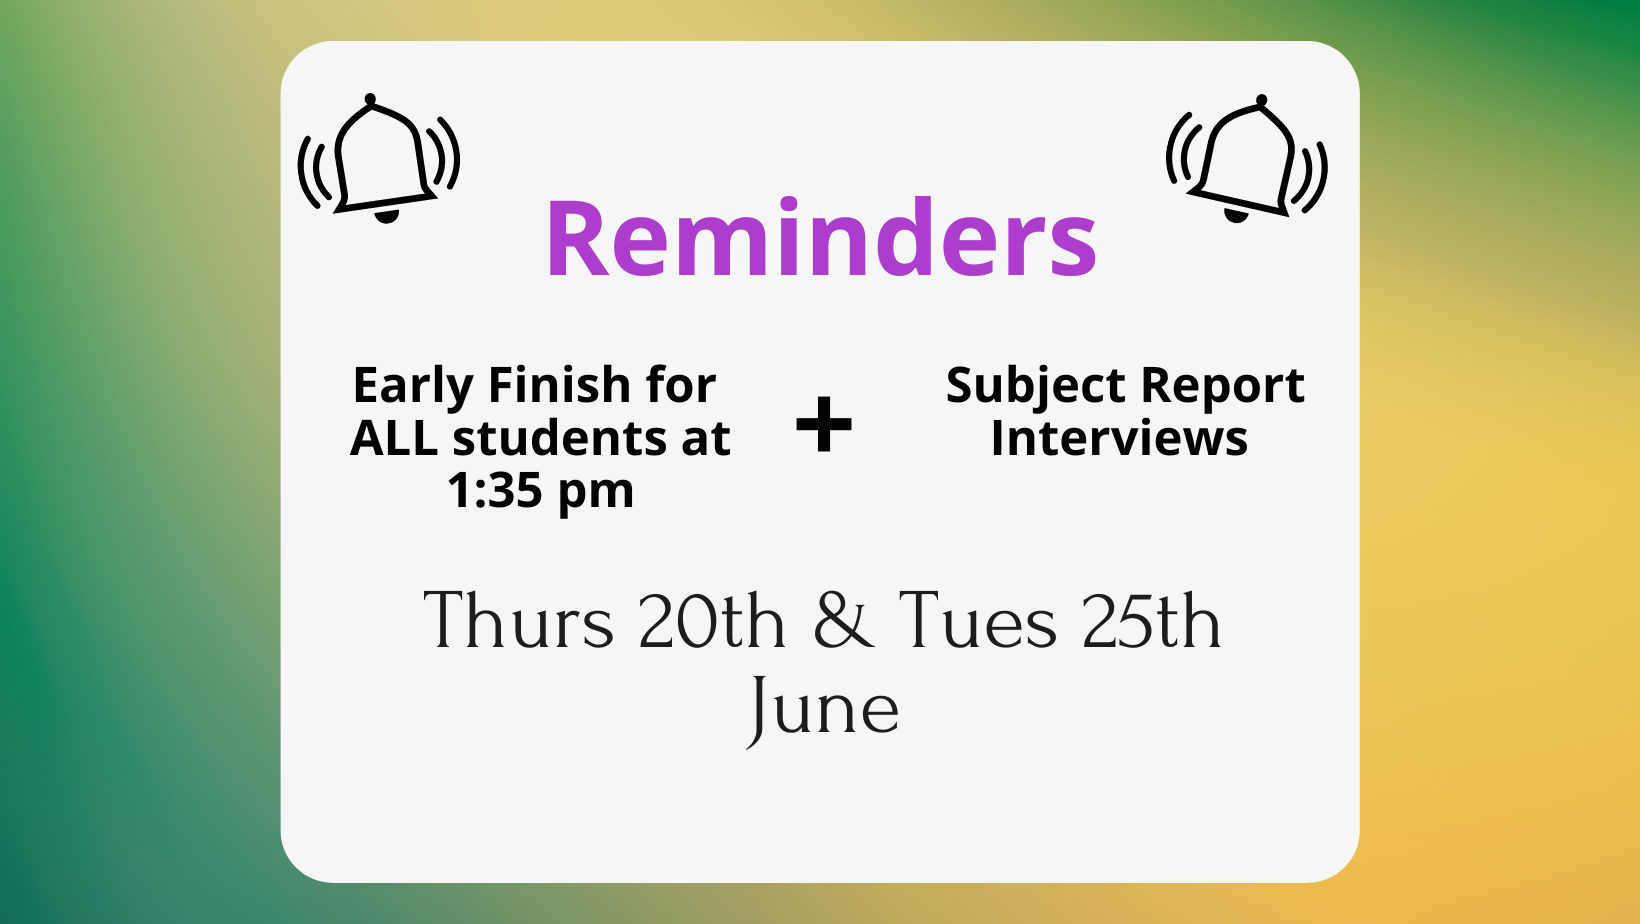 Early Finish + Subject Report Interviews